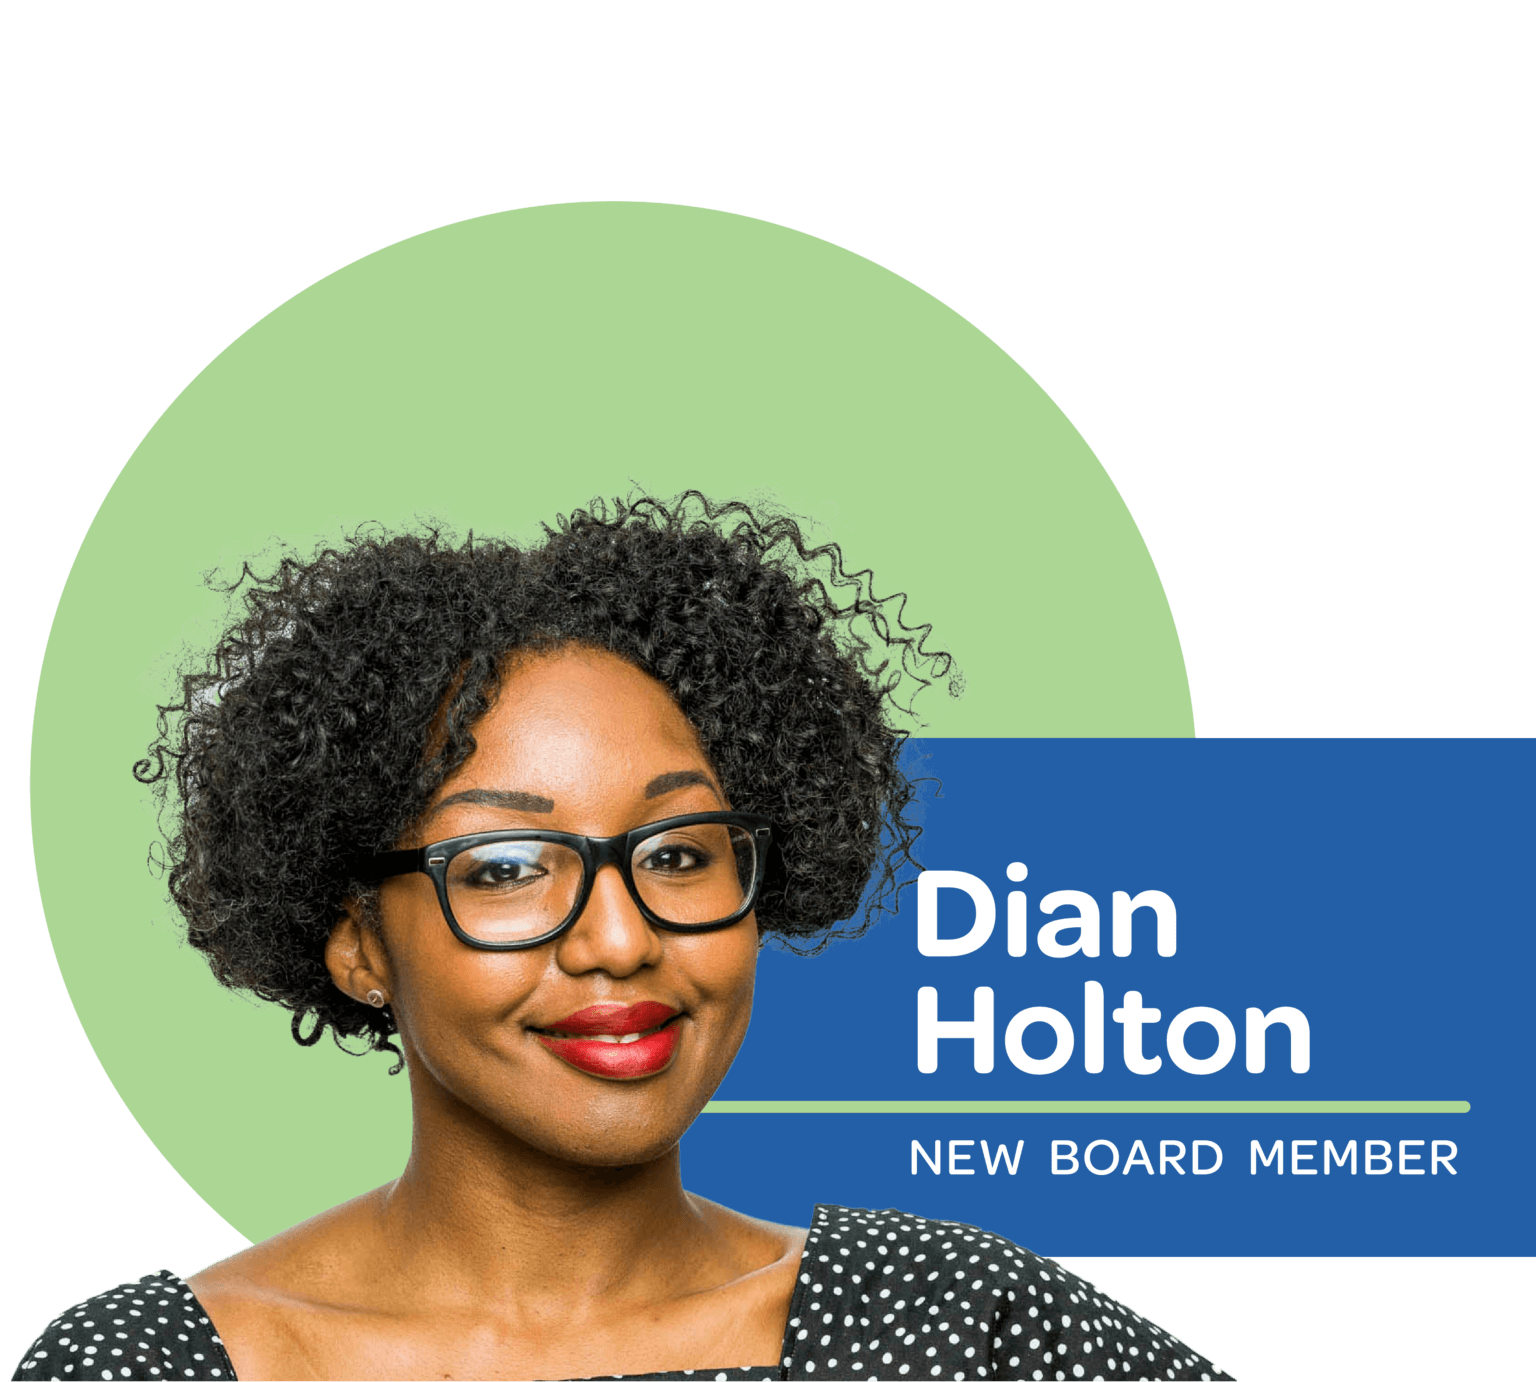 Image of Dian Holton, a new Safe Shores board member.